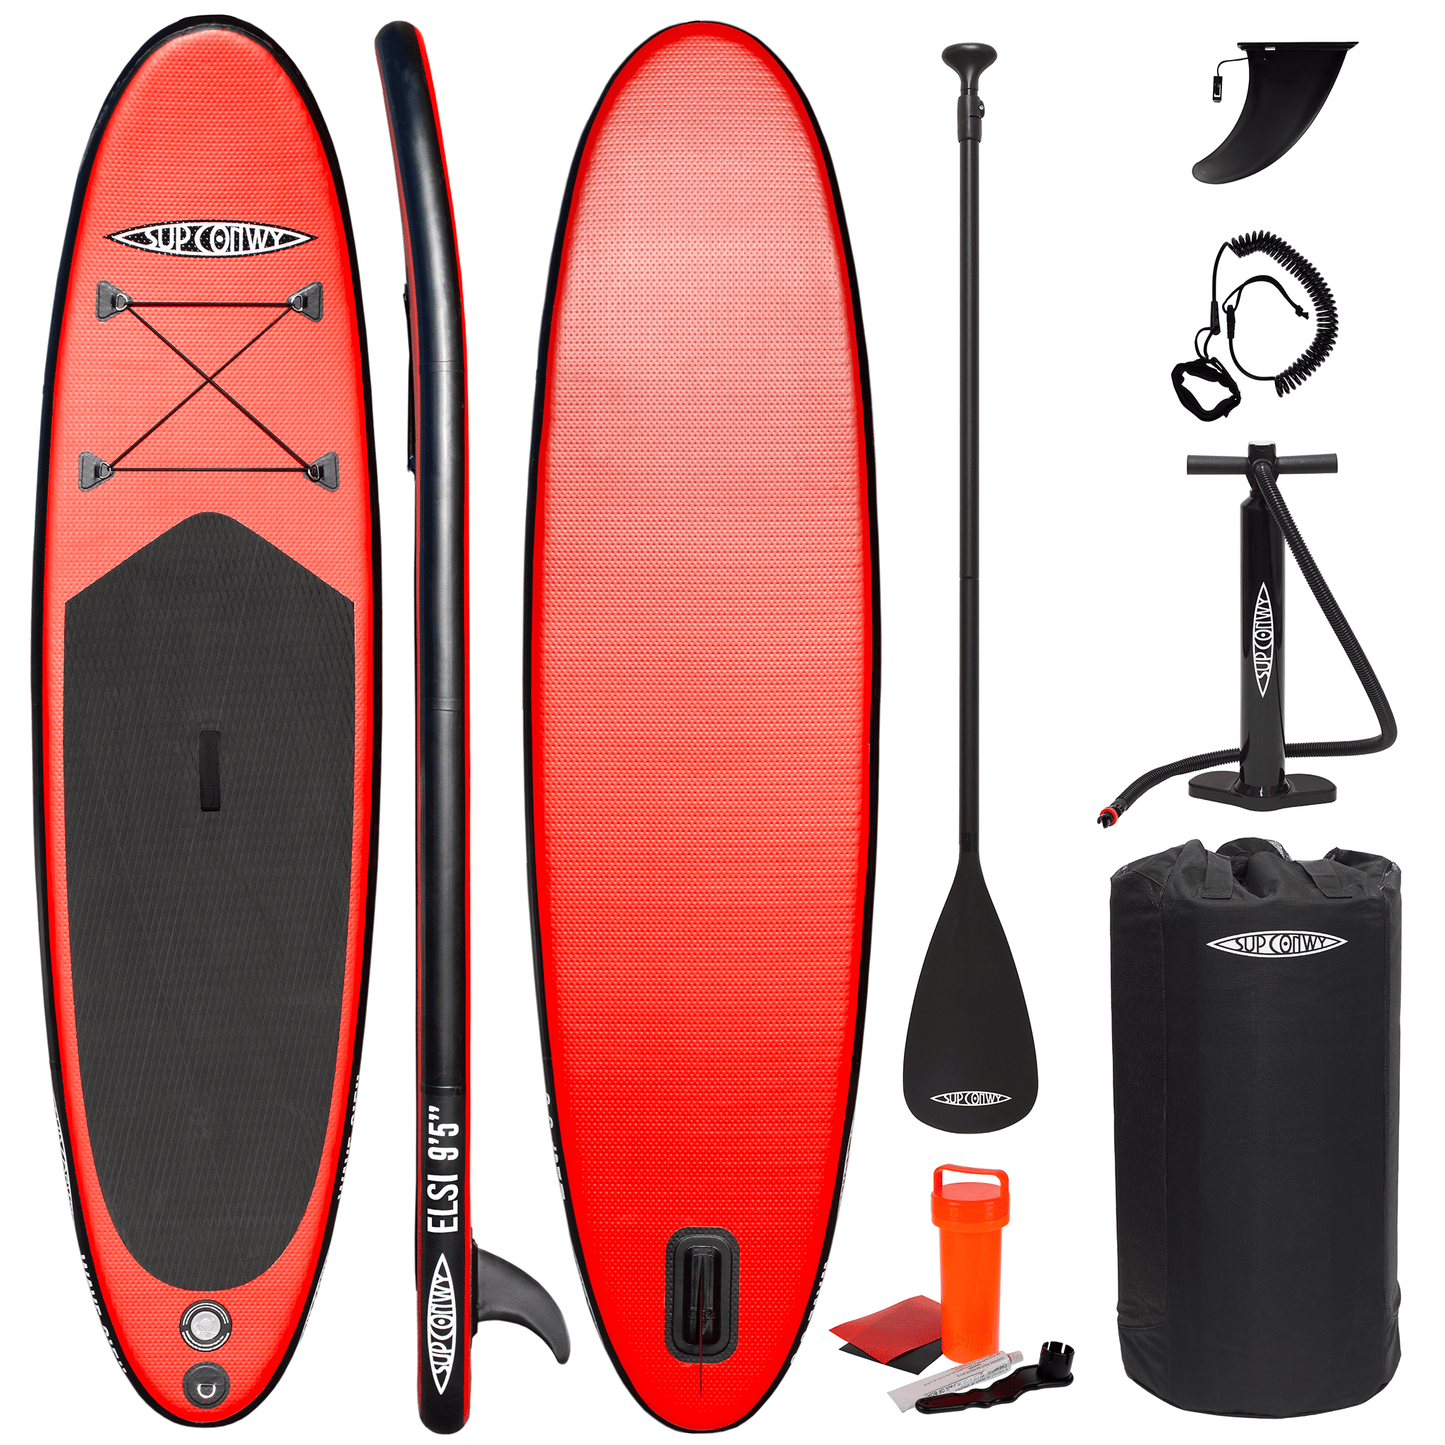 SUP Conwy - Elsi - 9'5 Inflatable Stand Up Paddle Board | Conwy Kayaks